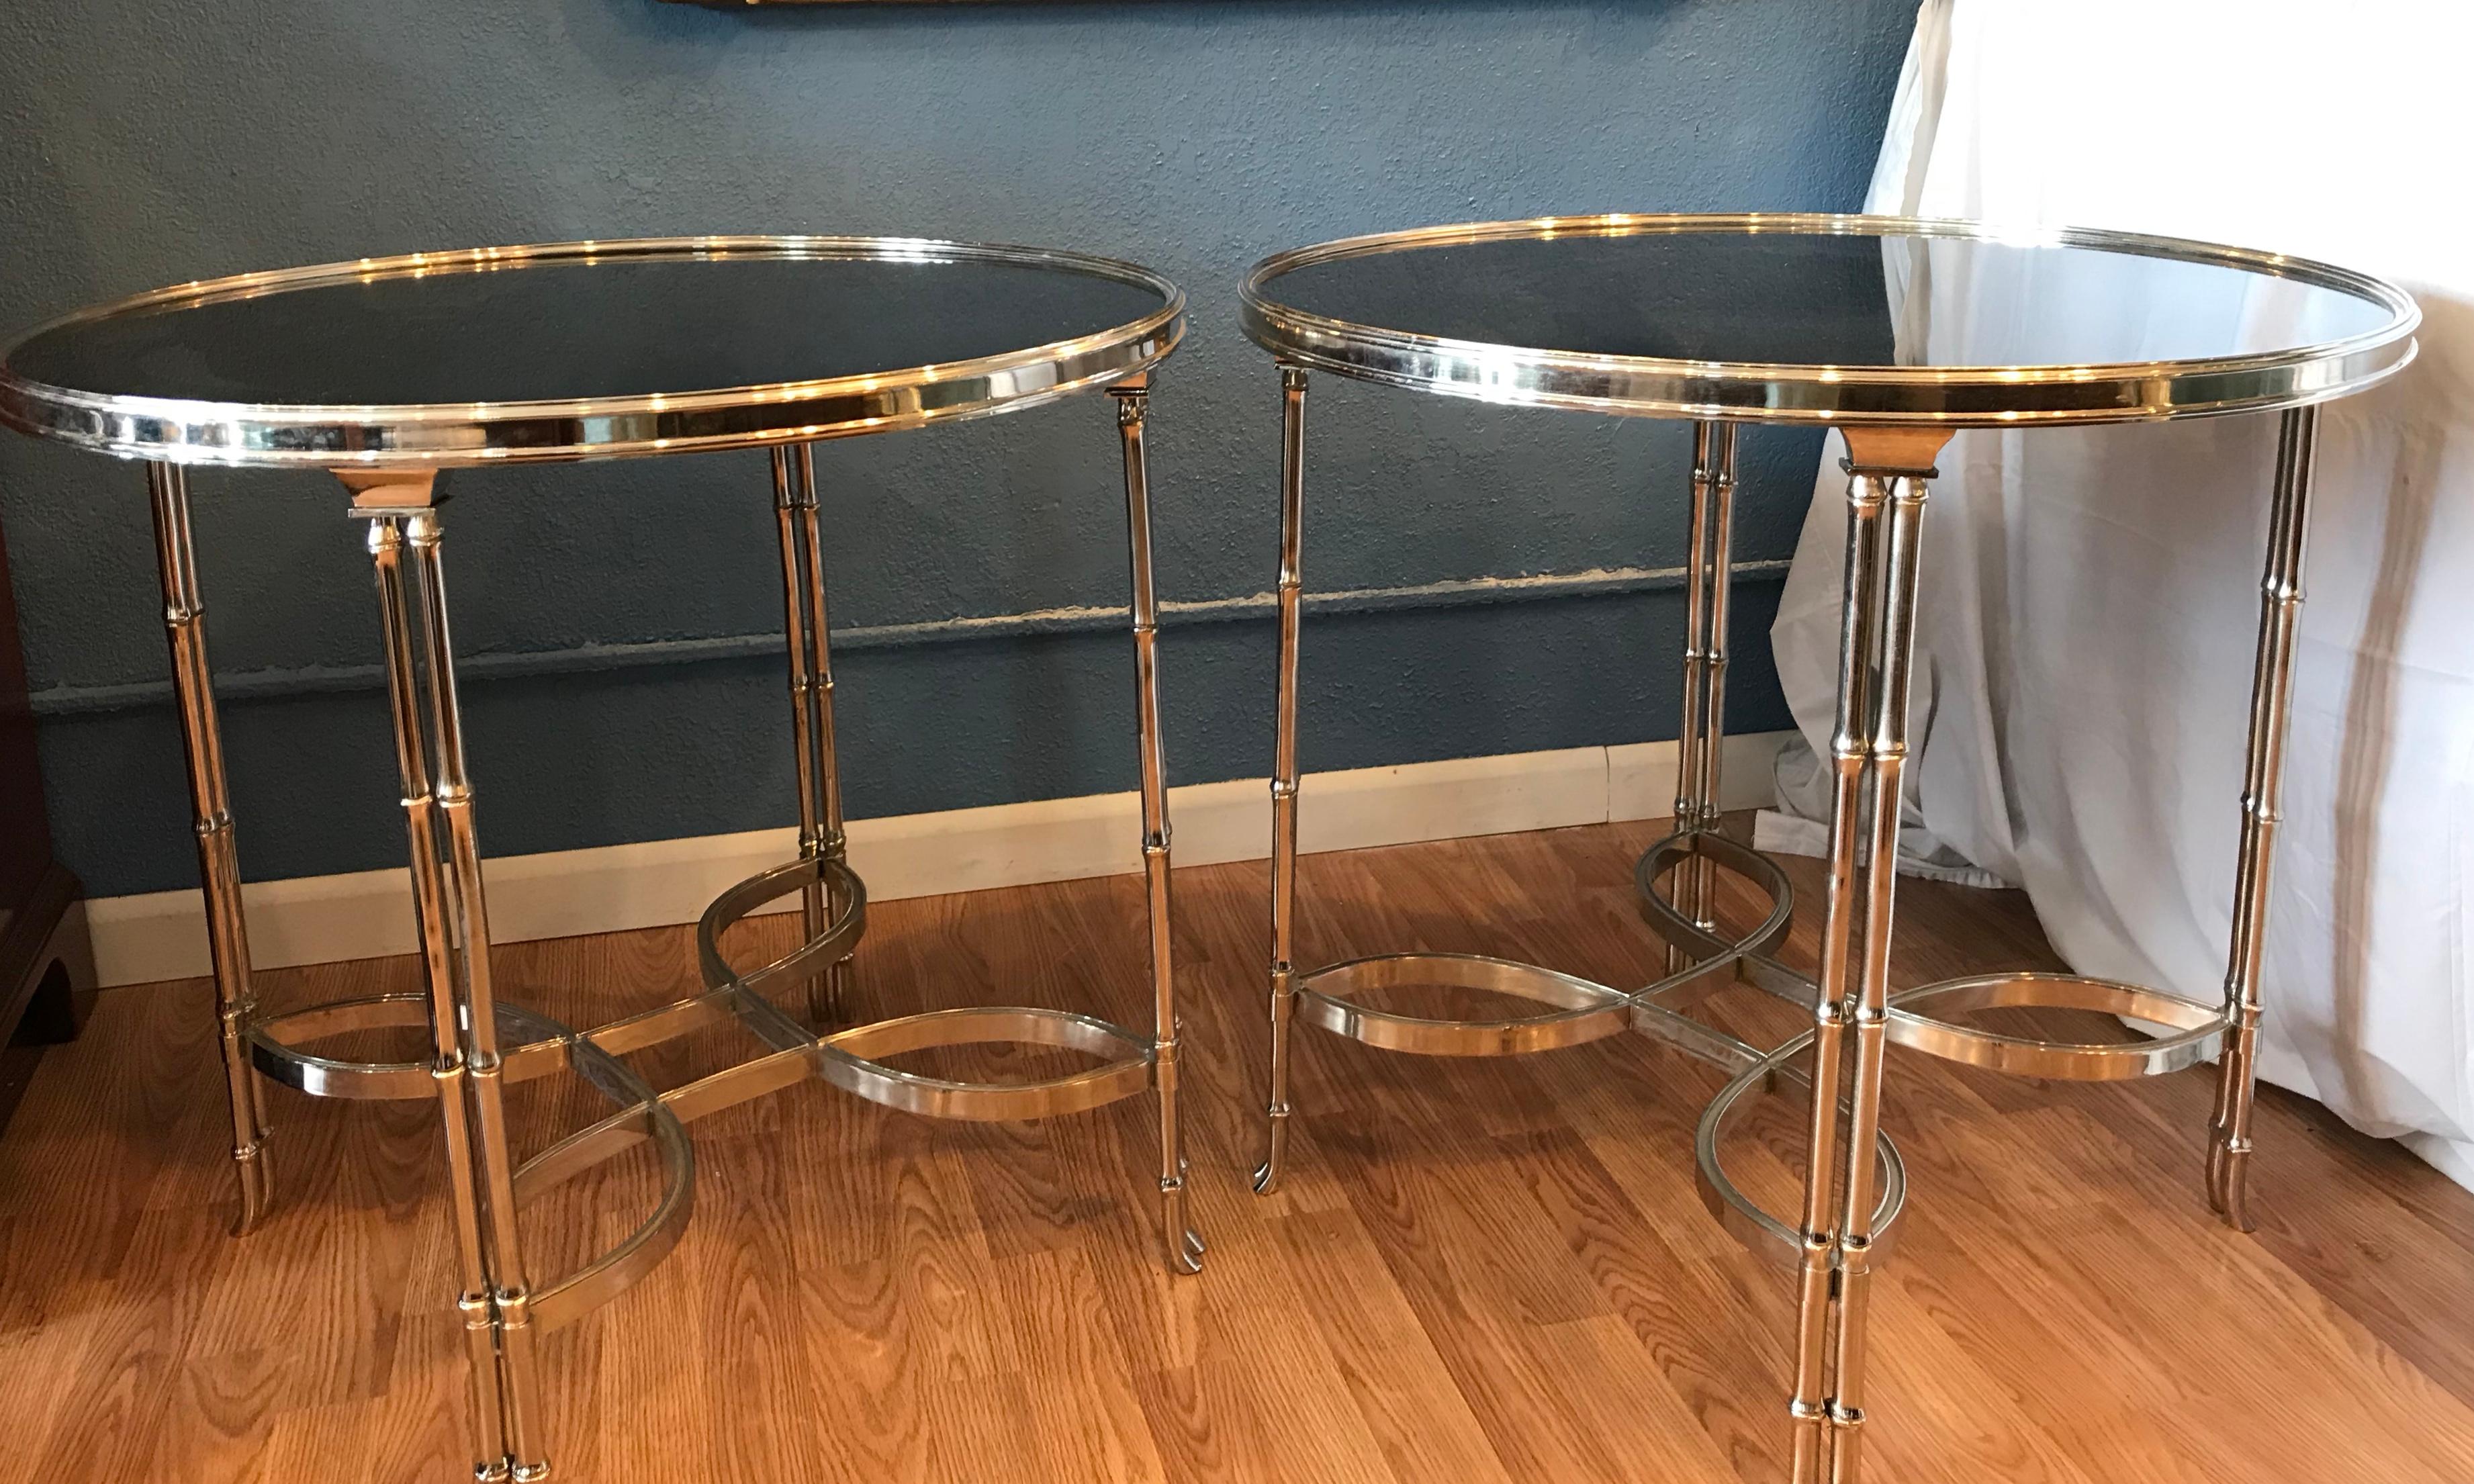 Fabulous quality and dramatic scale. The tables are finely detailed 
with faux bamboo legs and mirror finished black stone tops.
The chrome trim glistens.